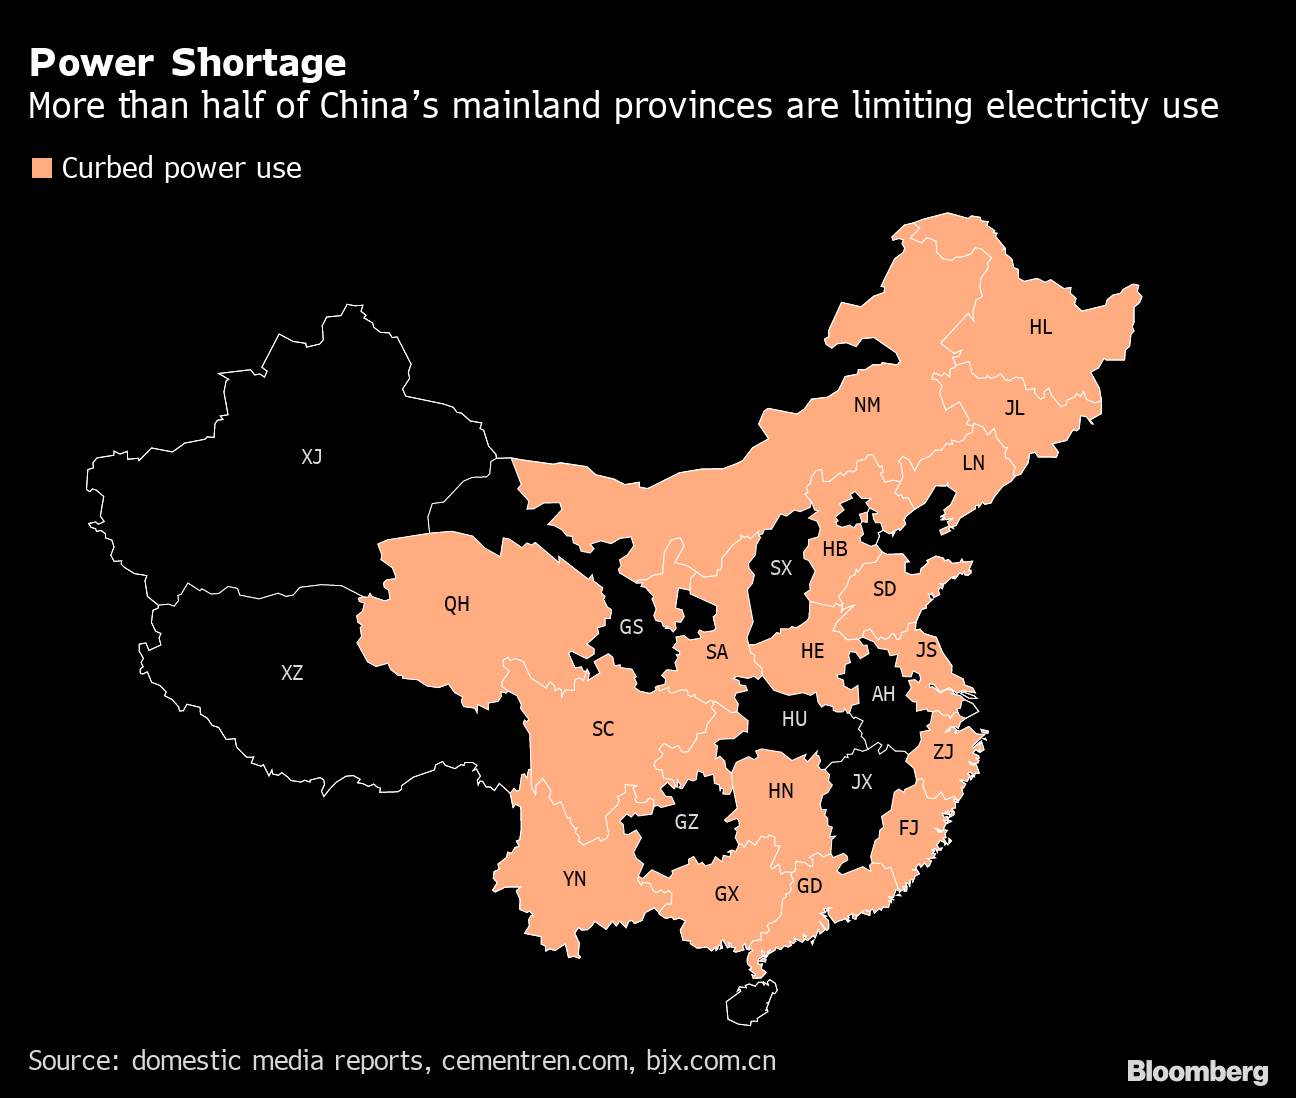 Cold Winter Could Make China&#39;s Power Crisis Much Worse - Bloomberg